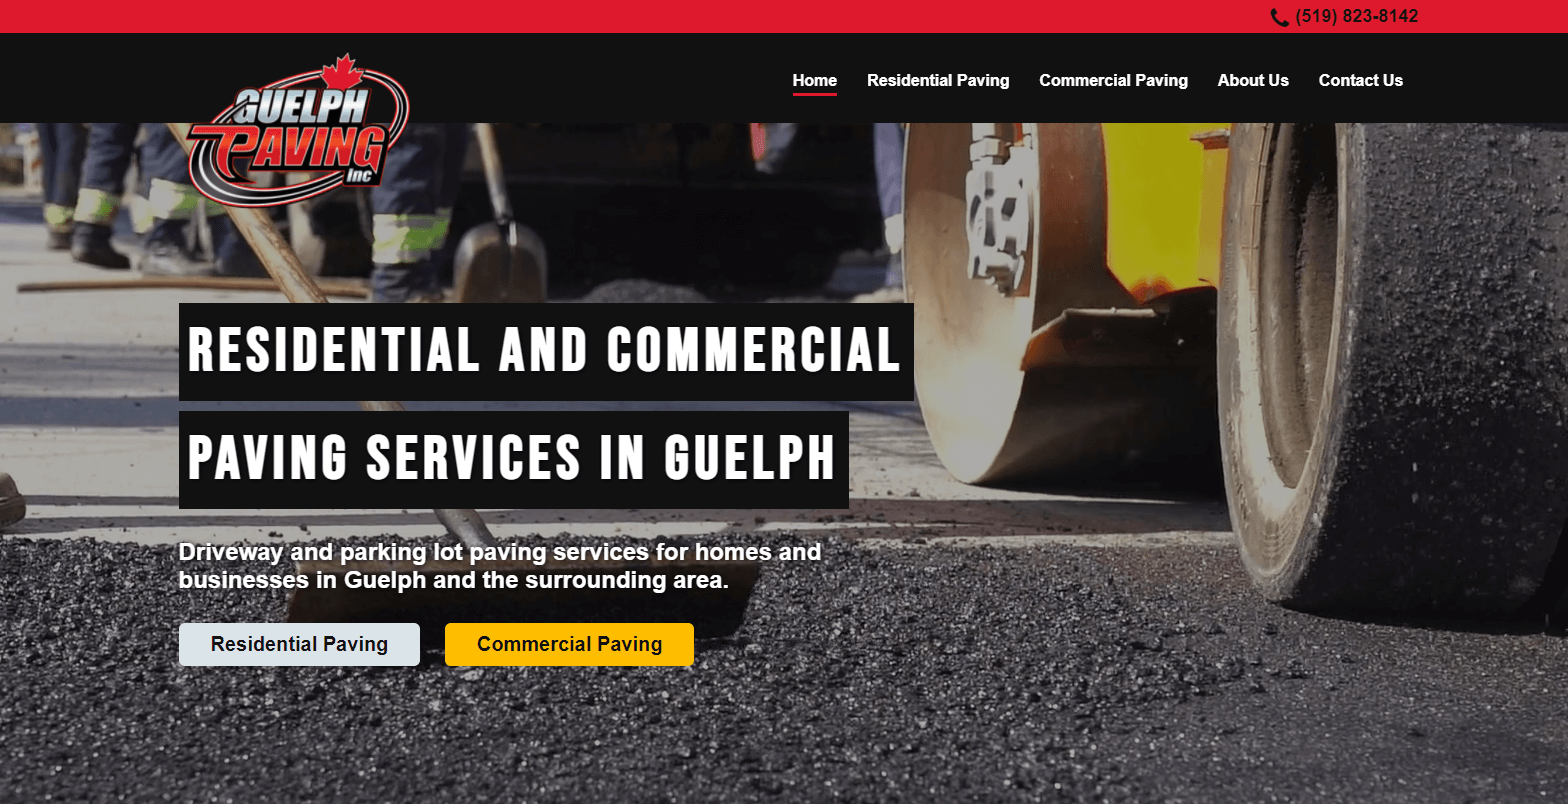 Screenshot of Guelph Paving website home page